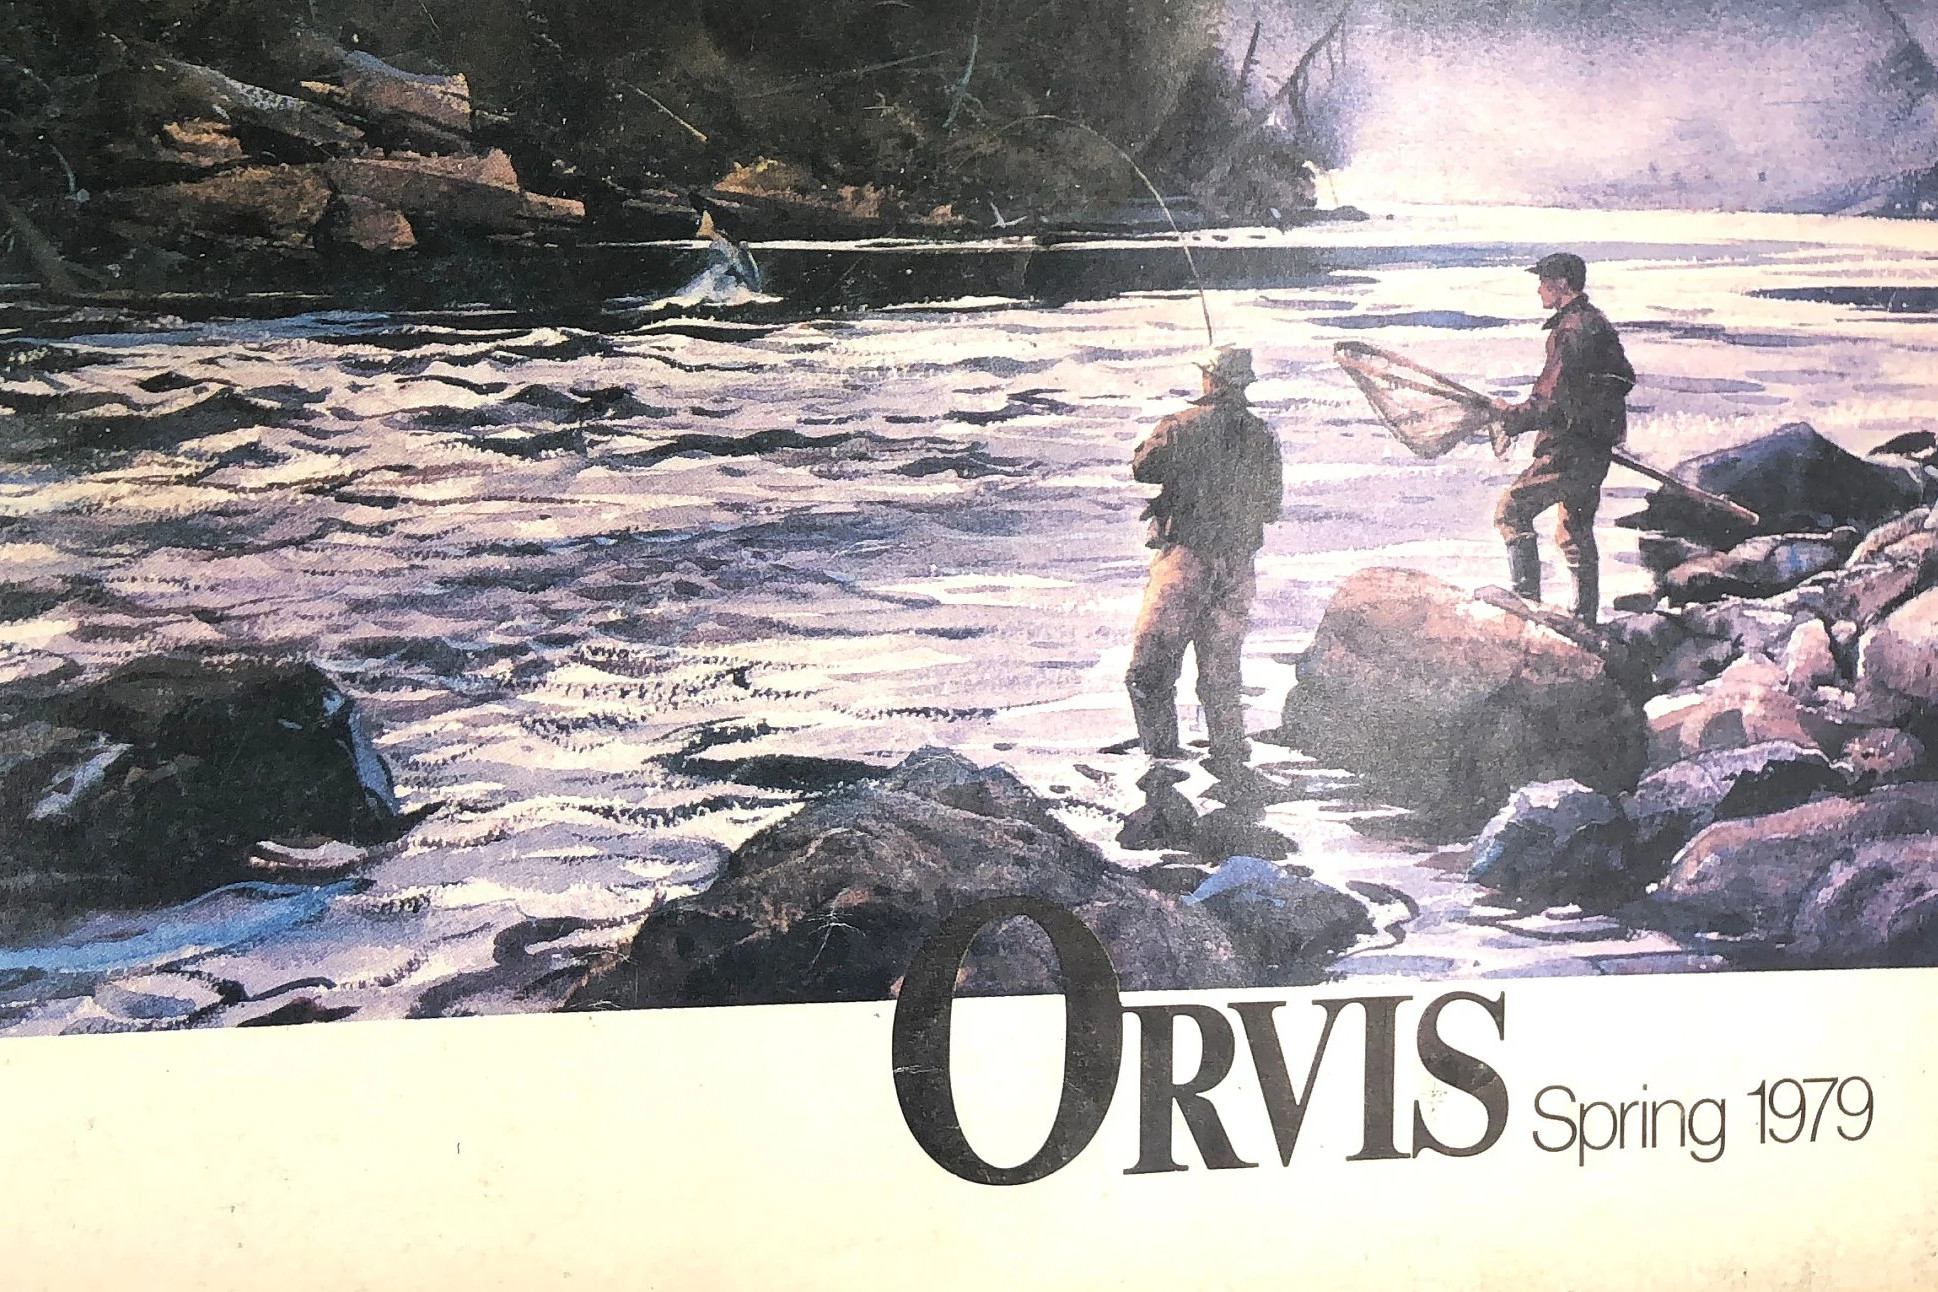 The cover of a vintage Orvis catalog from 1979.